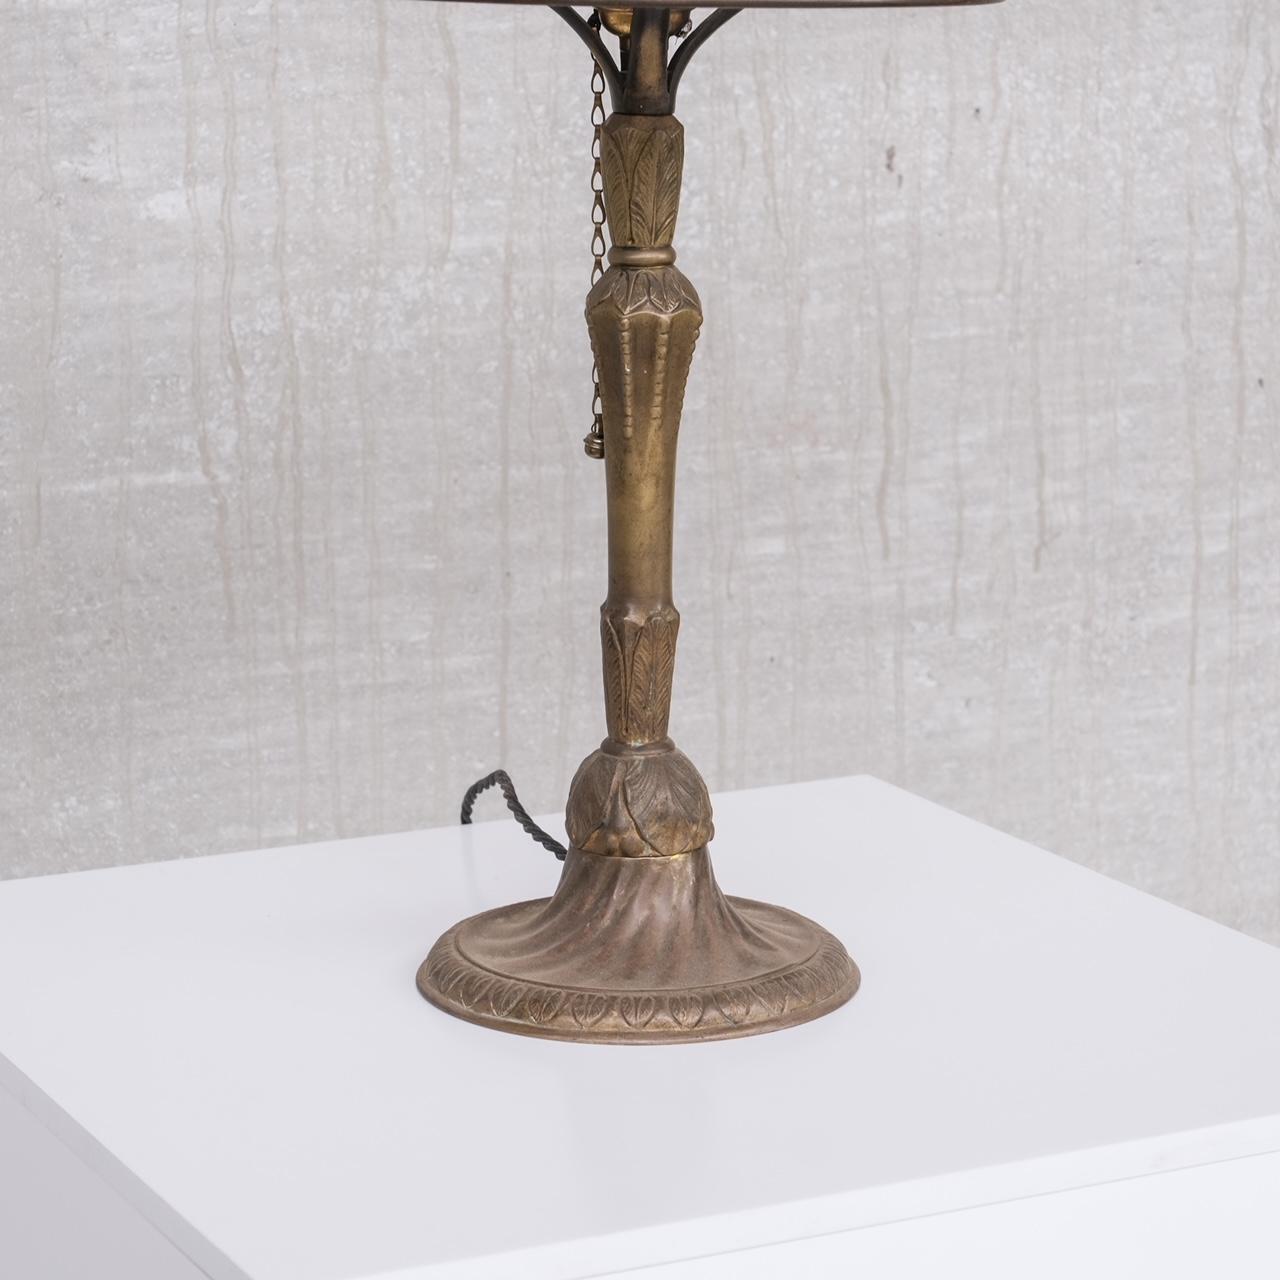 20th Century French Art Nouveau Brass and Glass Table Lamp For Sale